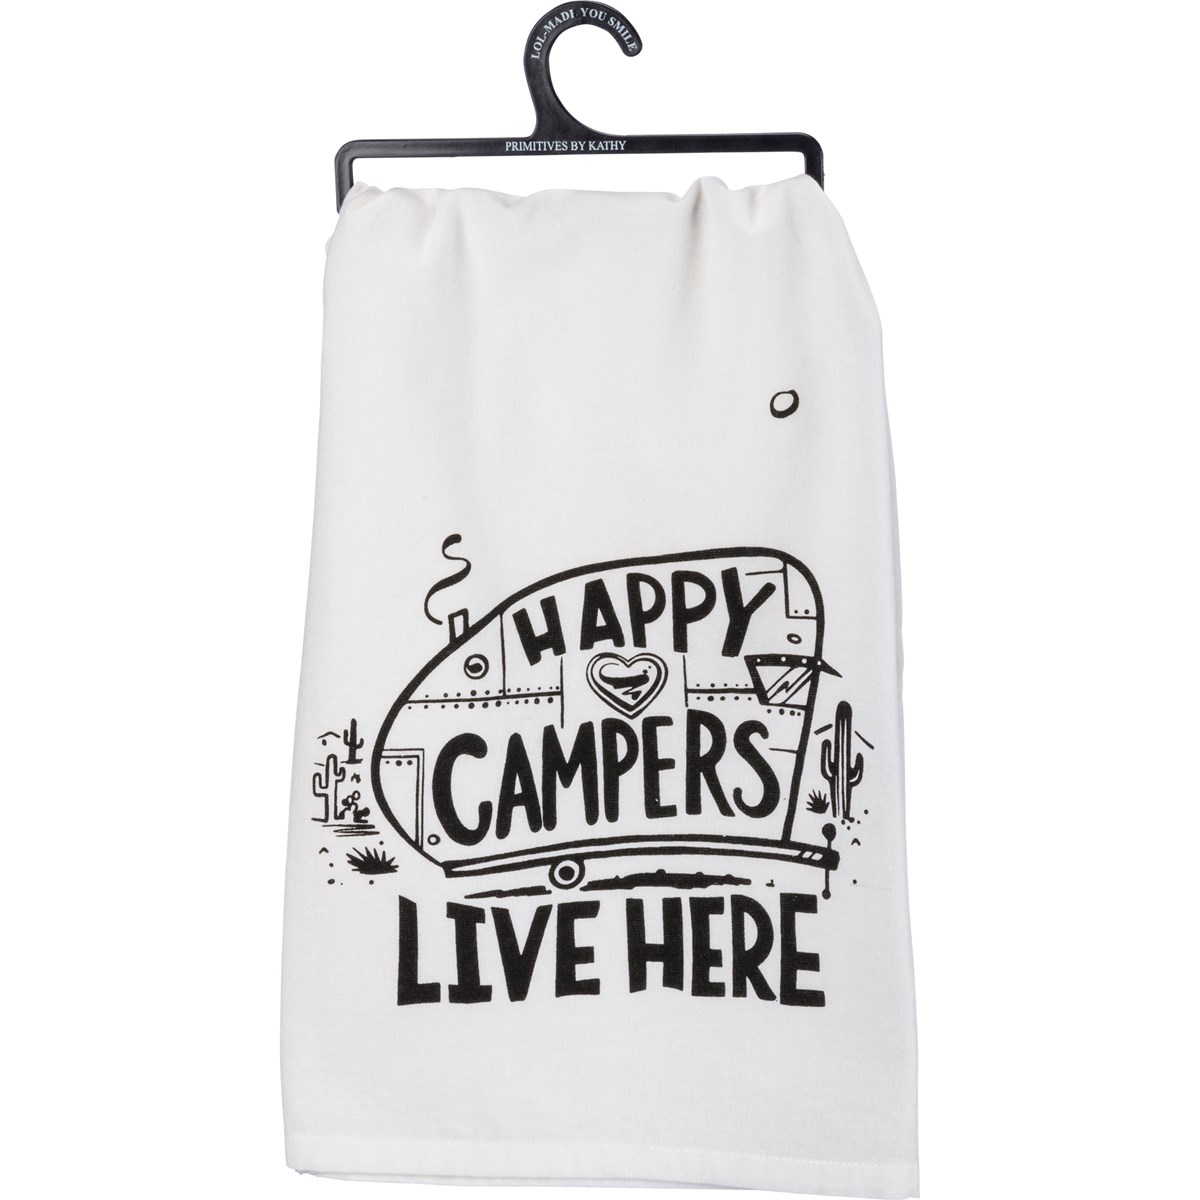 Kitchen Towel - Happy Campers Live Here - 28" x 28" - Cotton